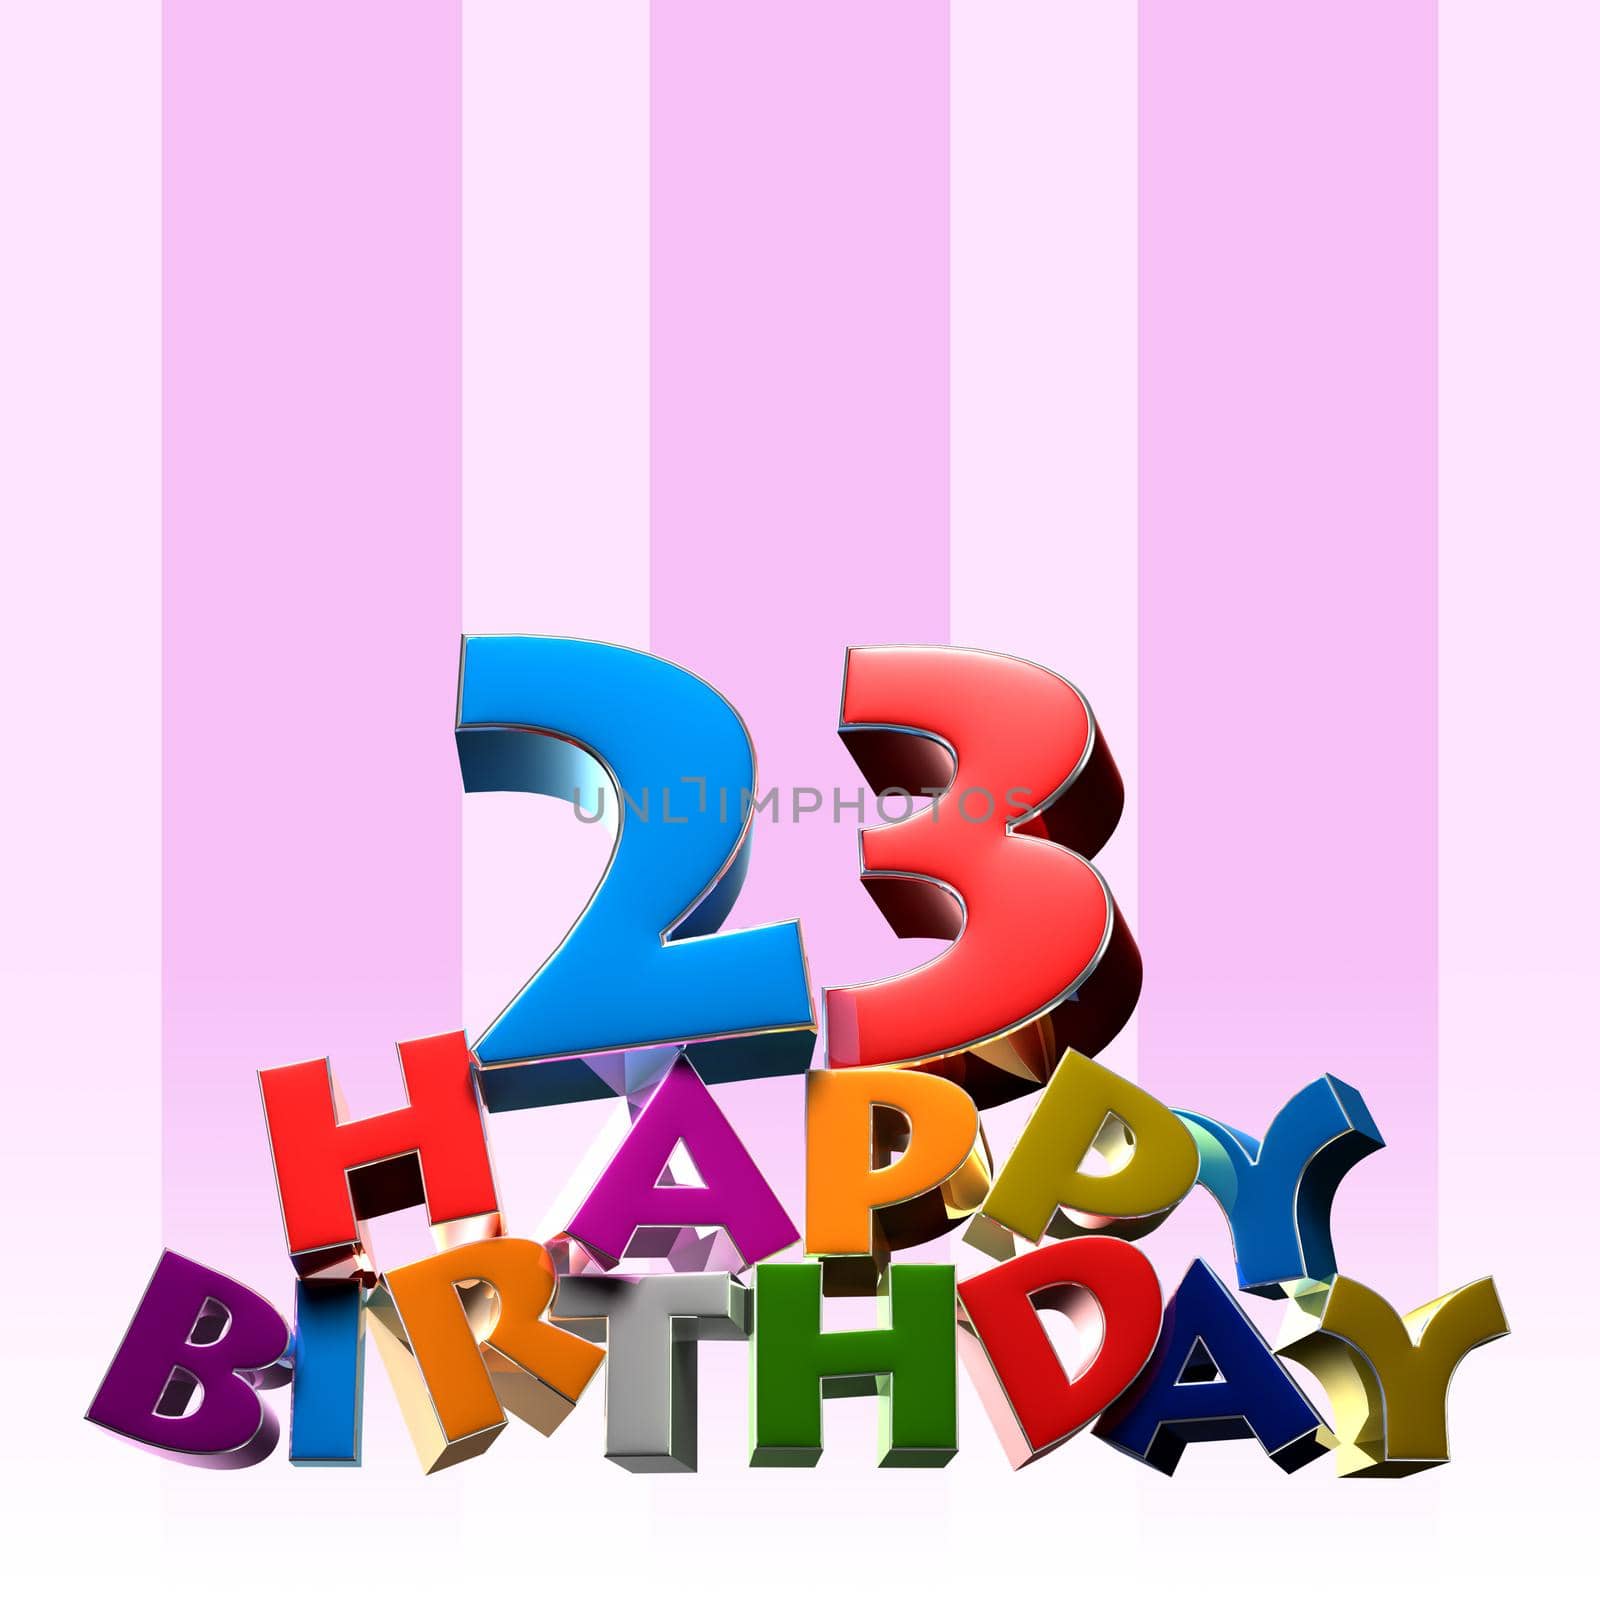 23 happy birthday 3D illustration on pink background with clipping path.